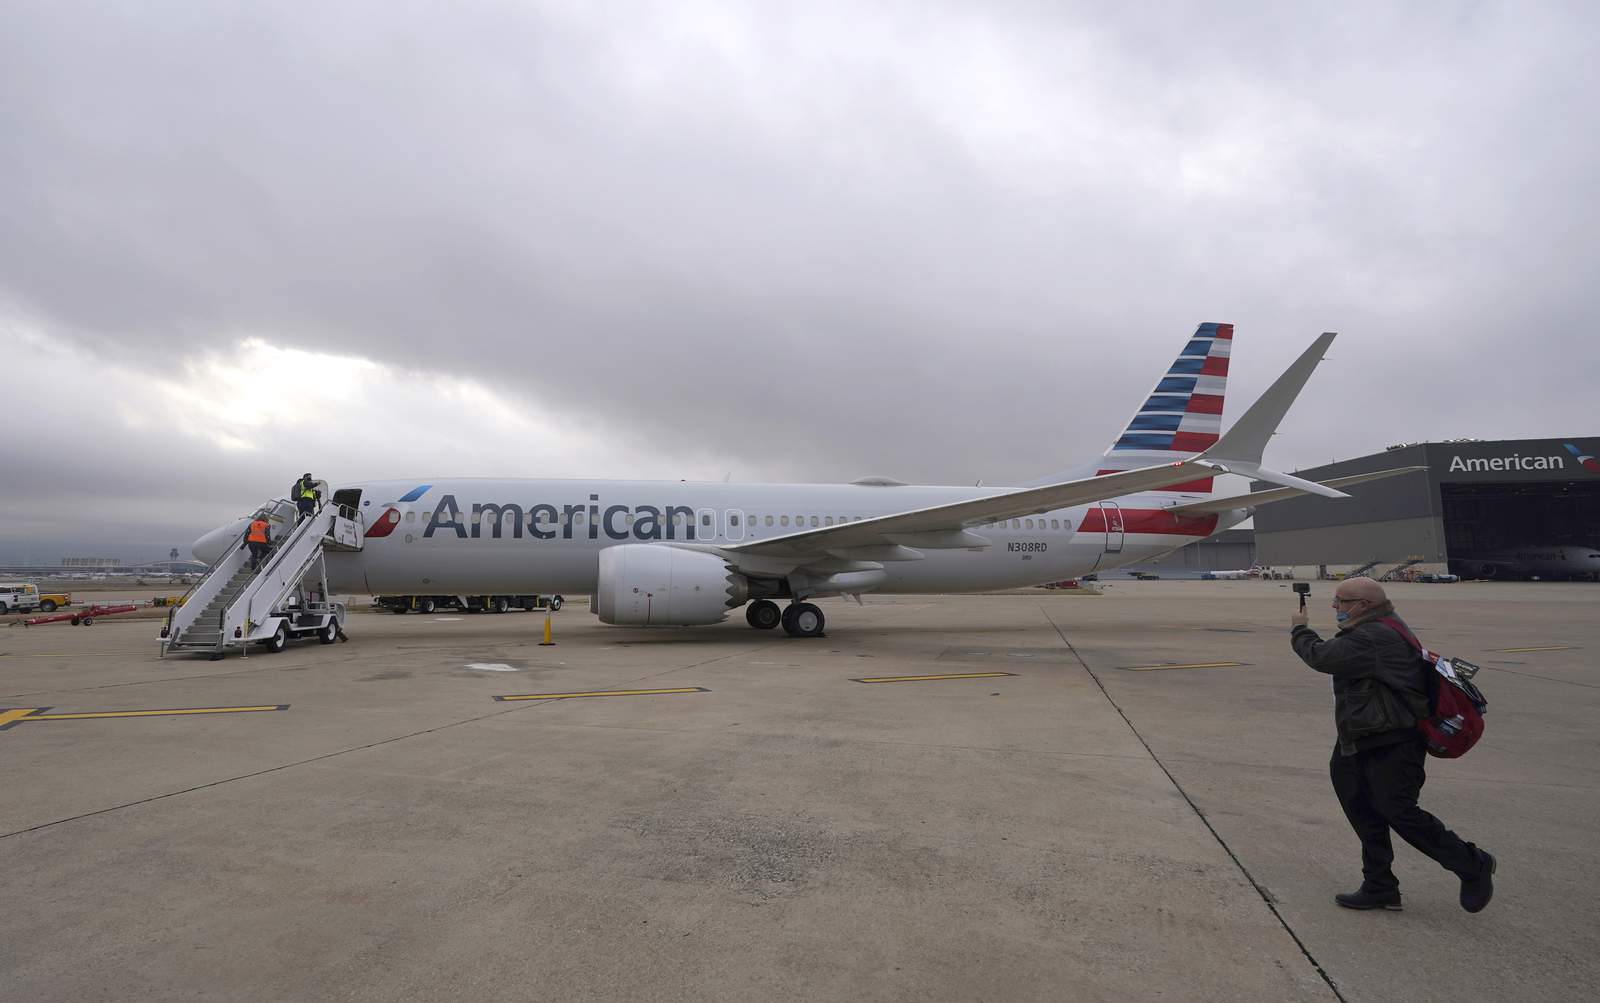 Waiting for passengers, American puts Boeing Max in the air